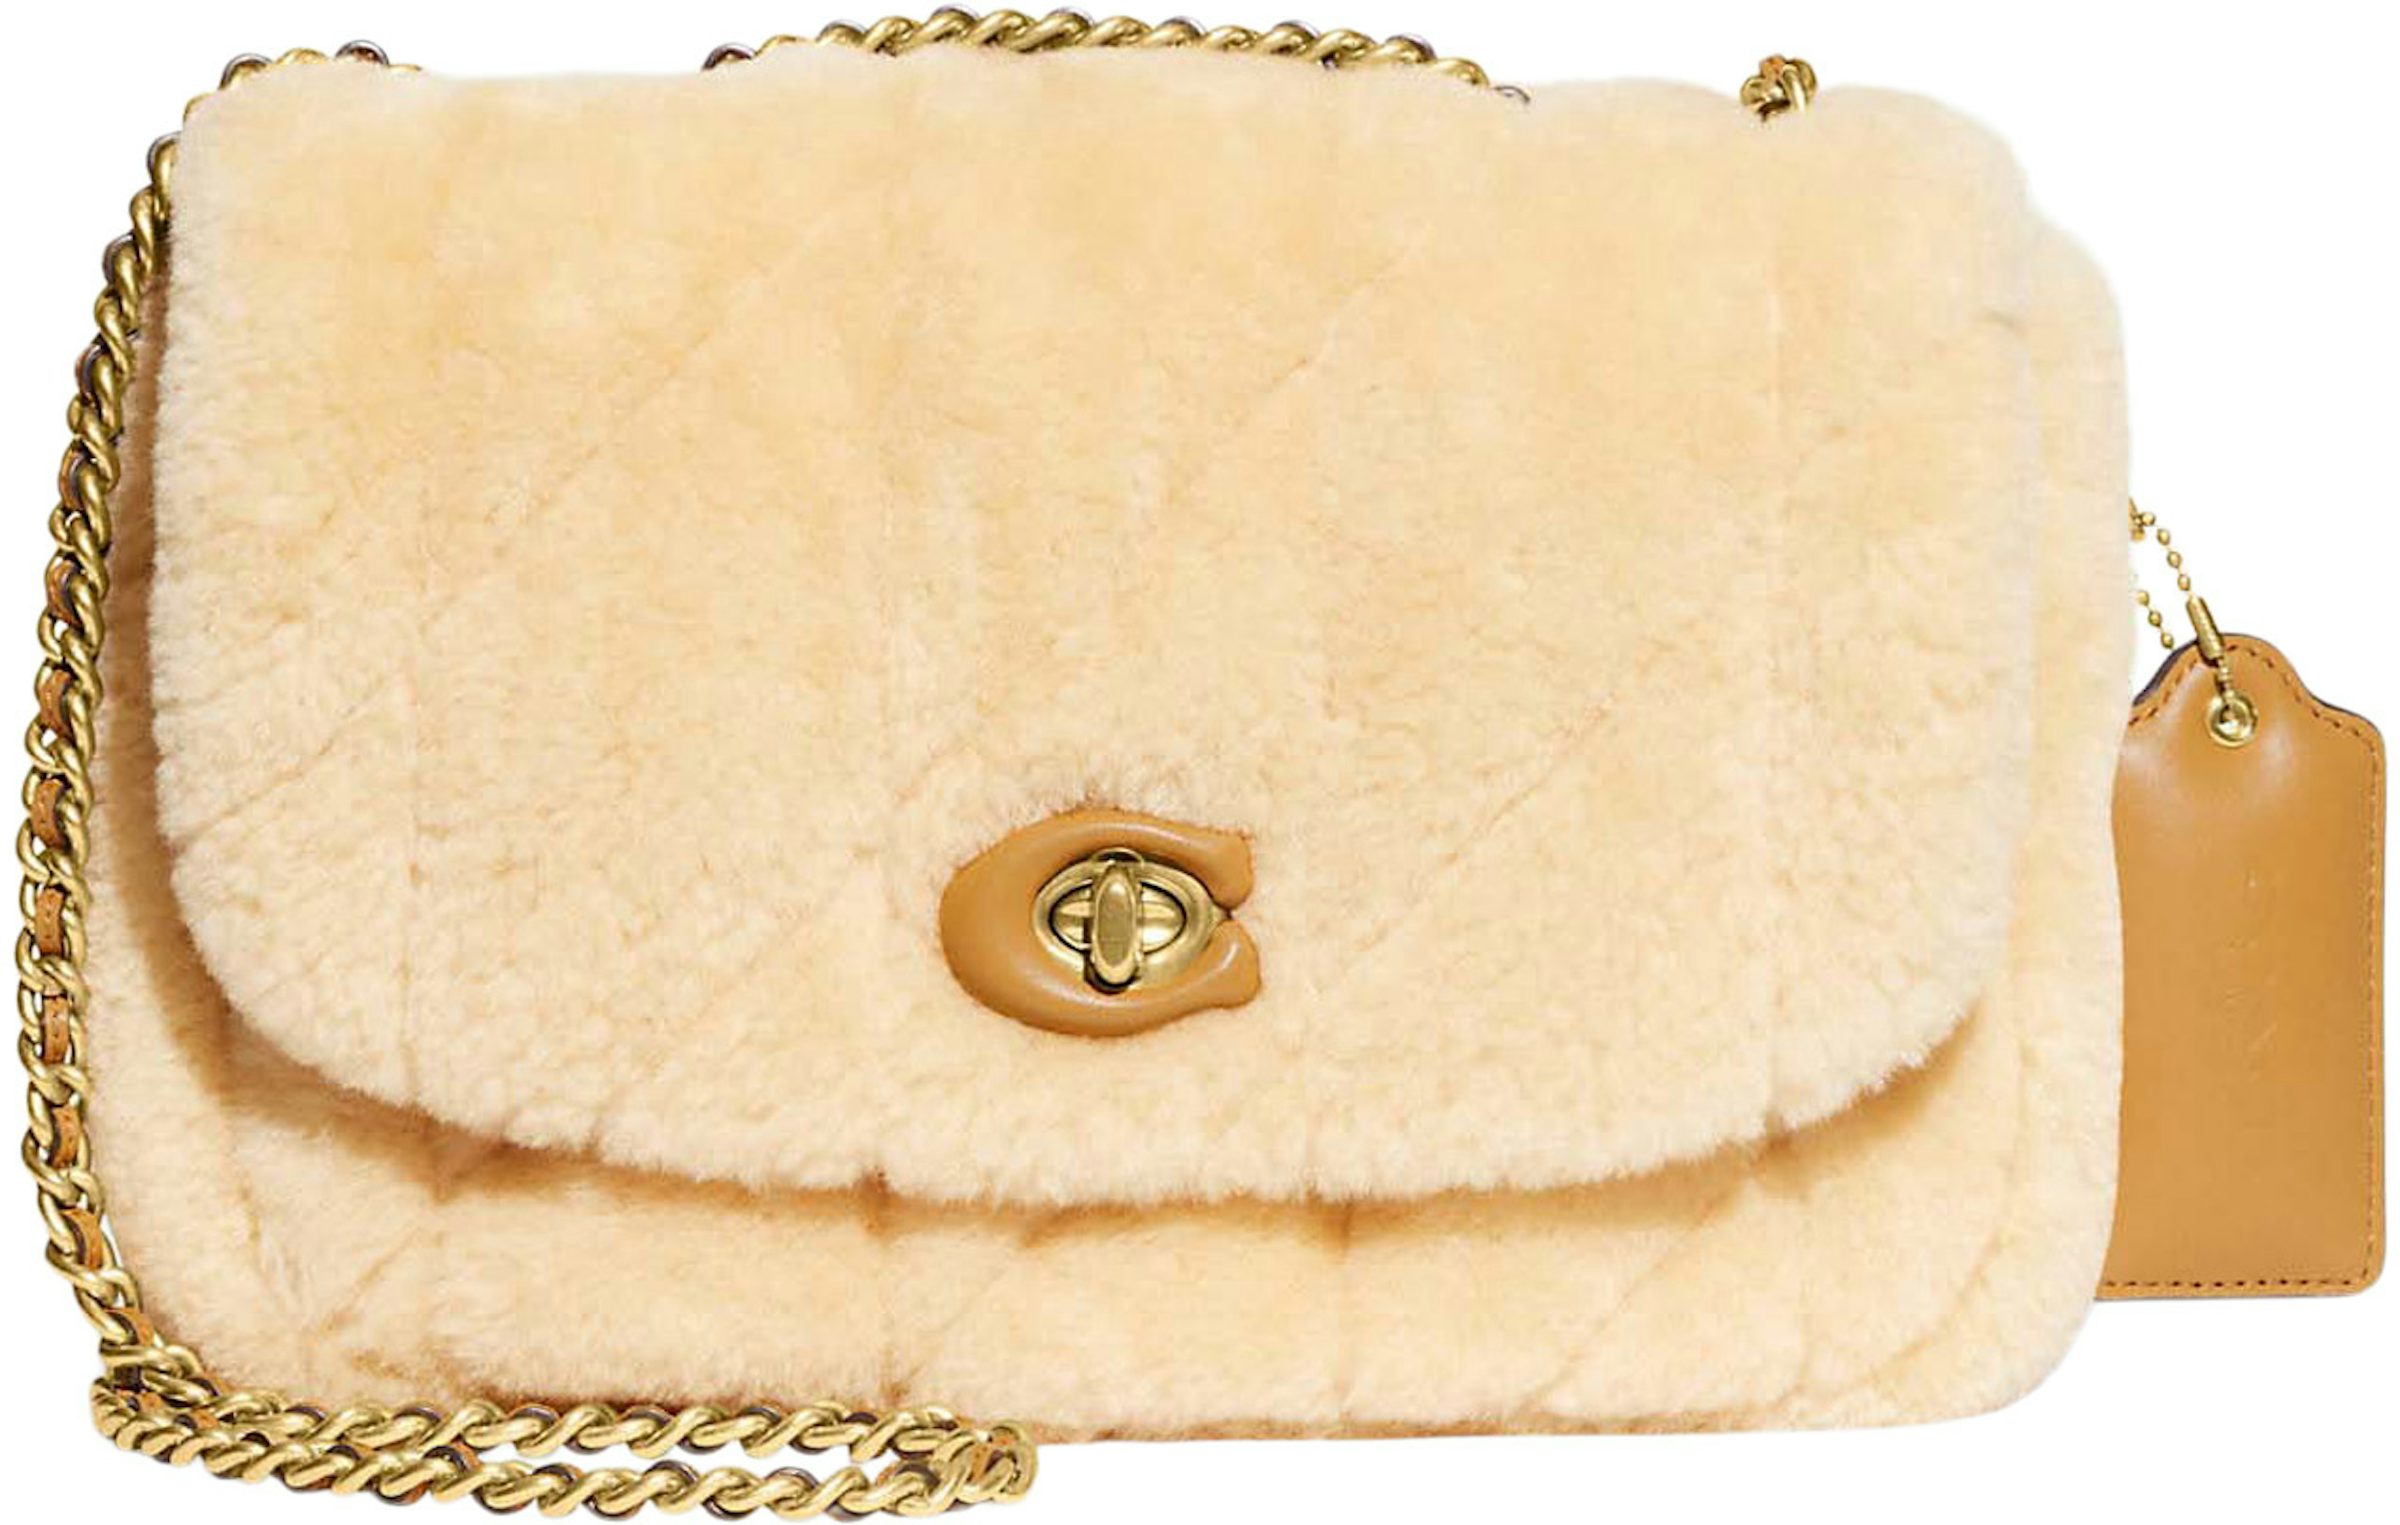 Coach Pillow Tabby 18 Shearling and Leather Bag